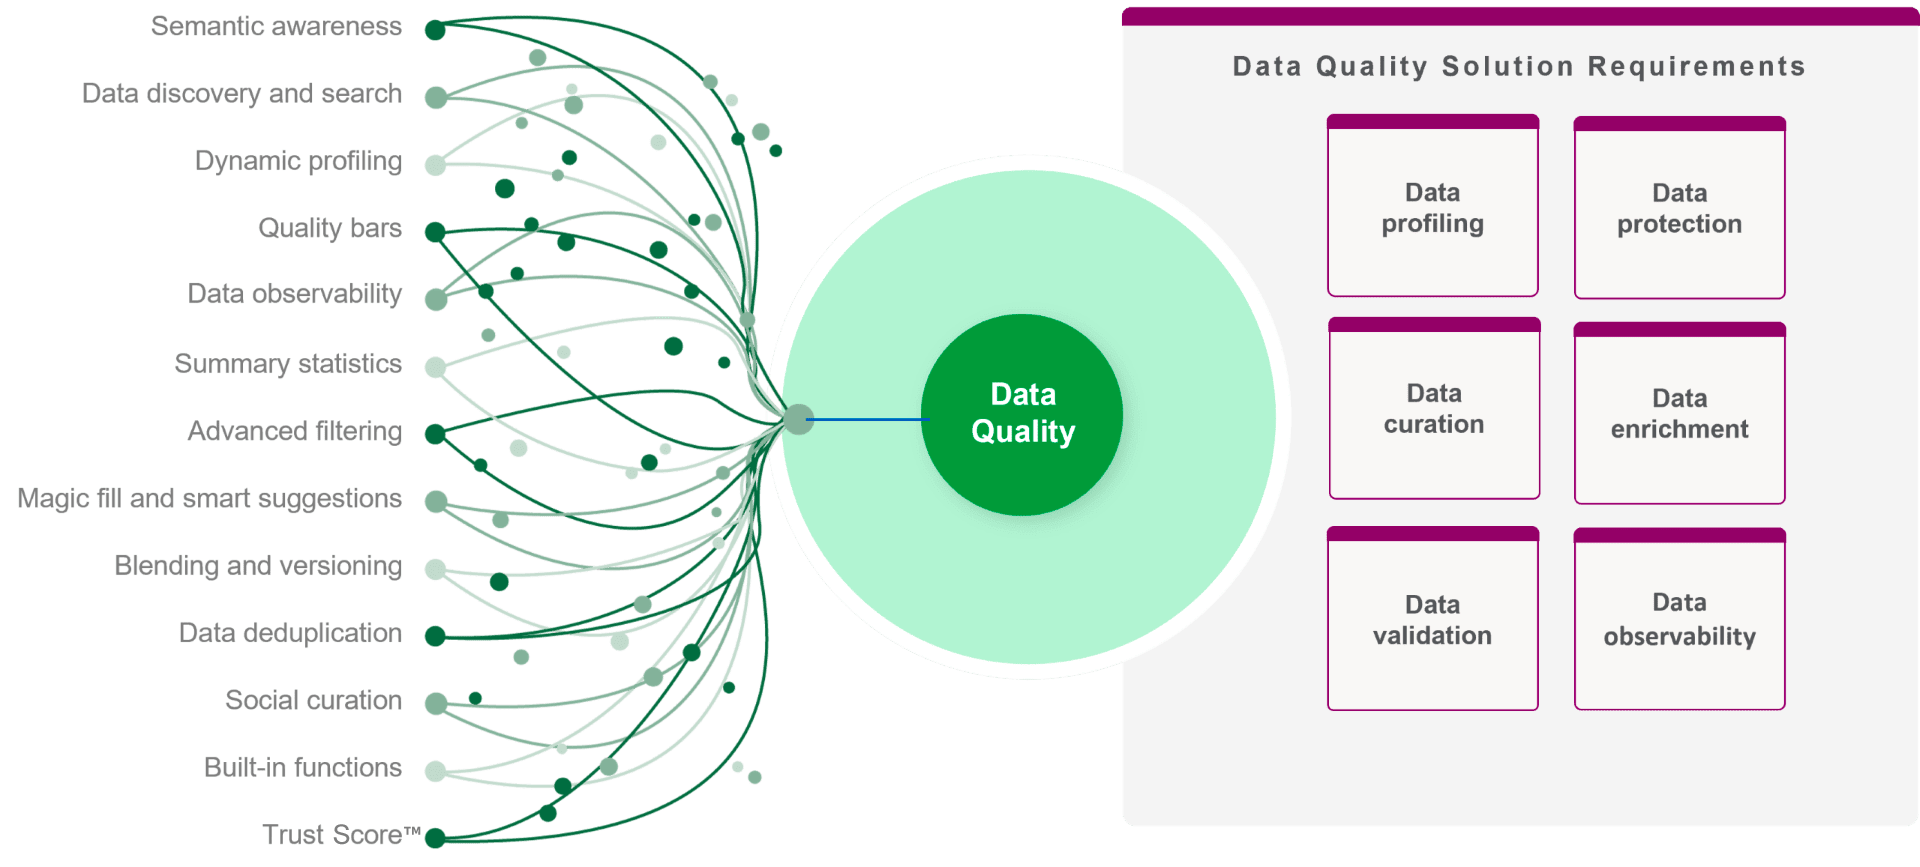 Diagram showing the flow from Data attributes to Data quality to Data quality solutions requirements